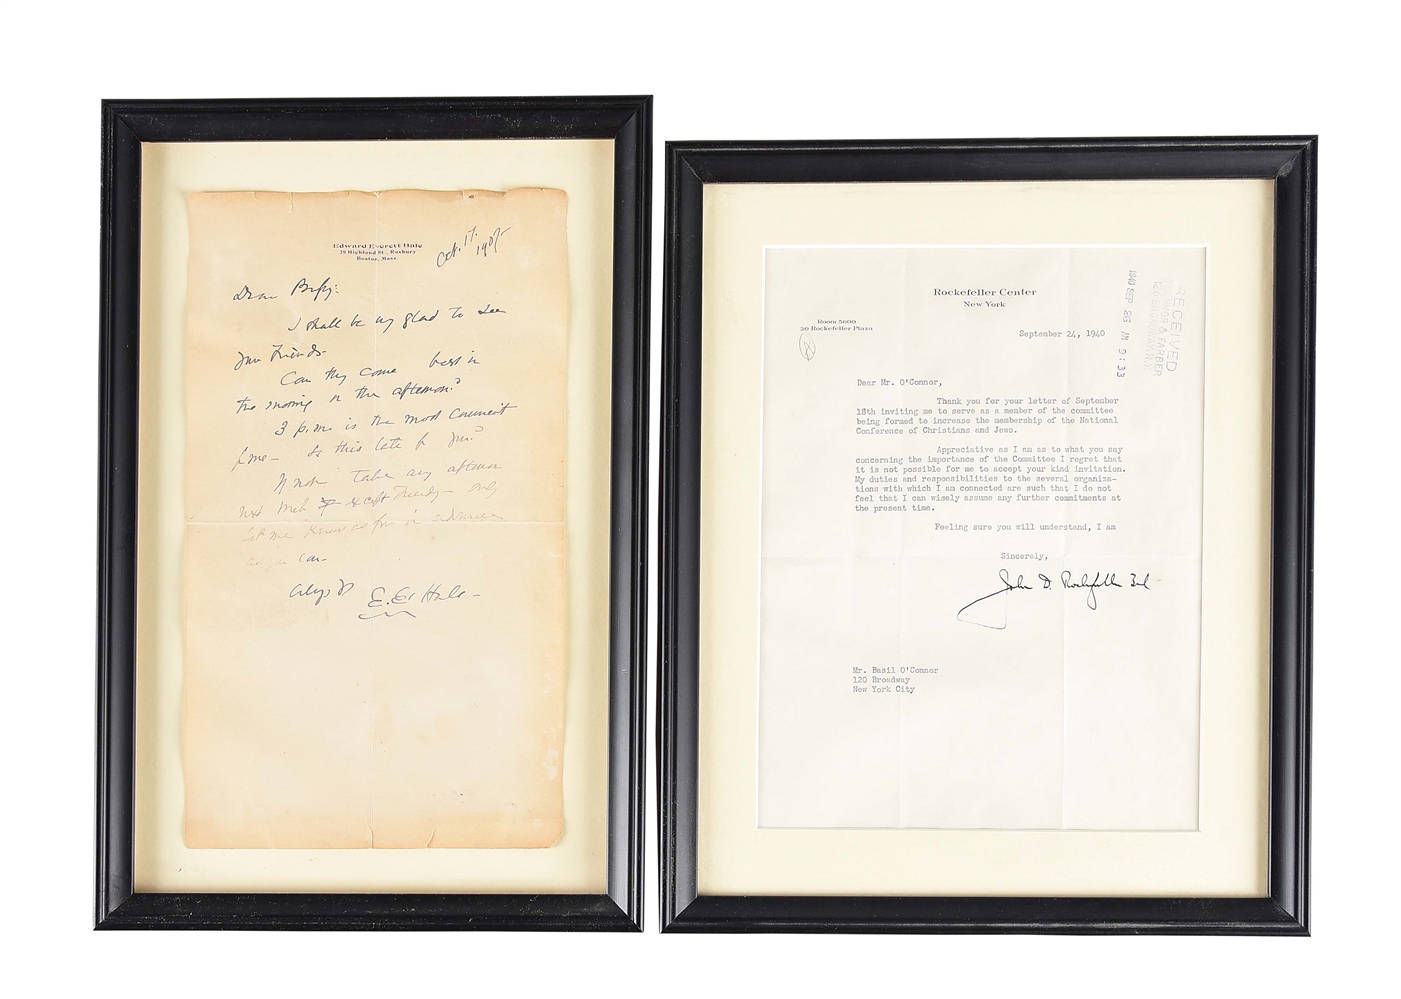 LOT OF 2: LETTERS SIGNED BY EDWARD E. HALE AND JOHN D. ROCKEFELLER.